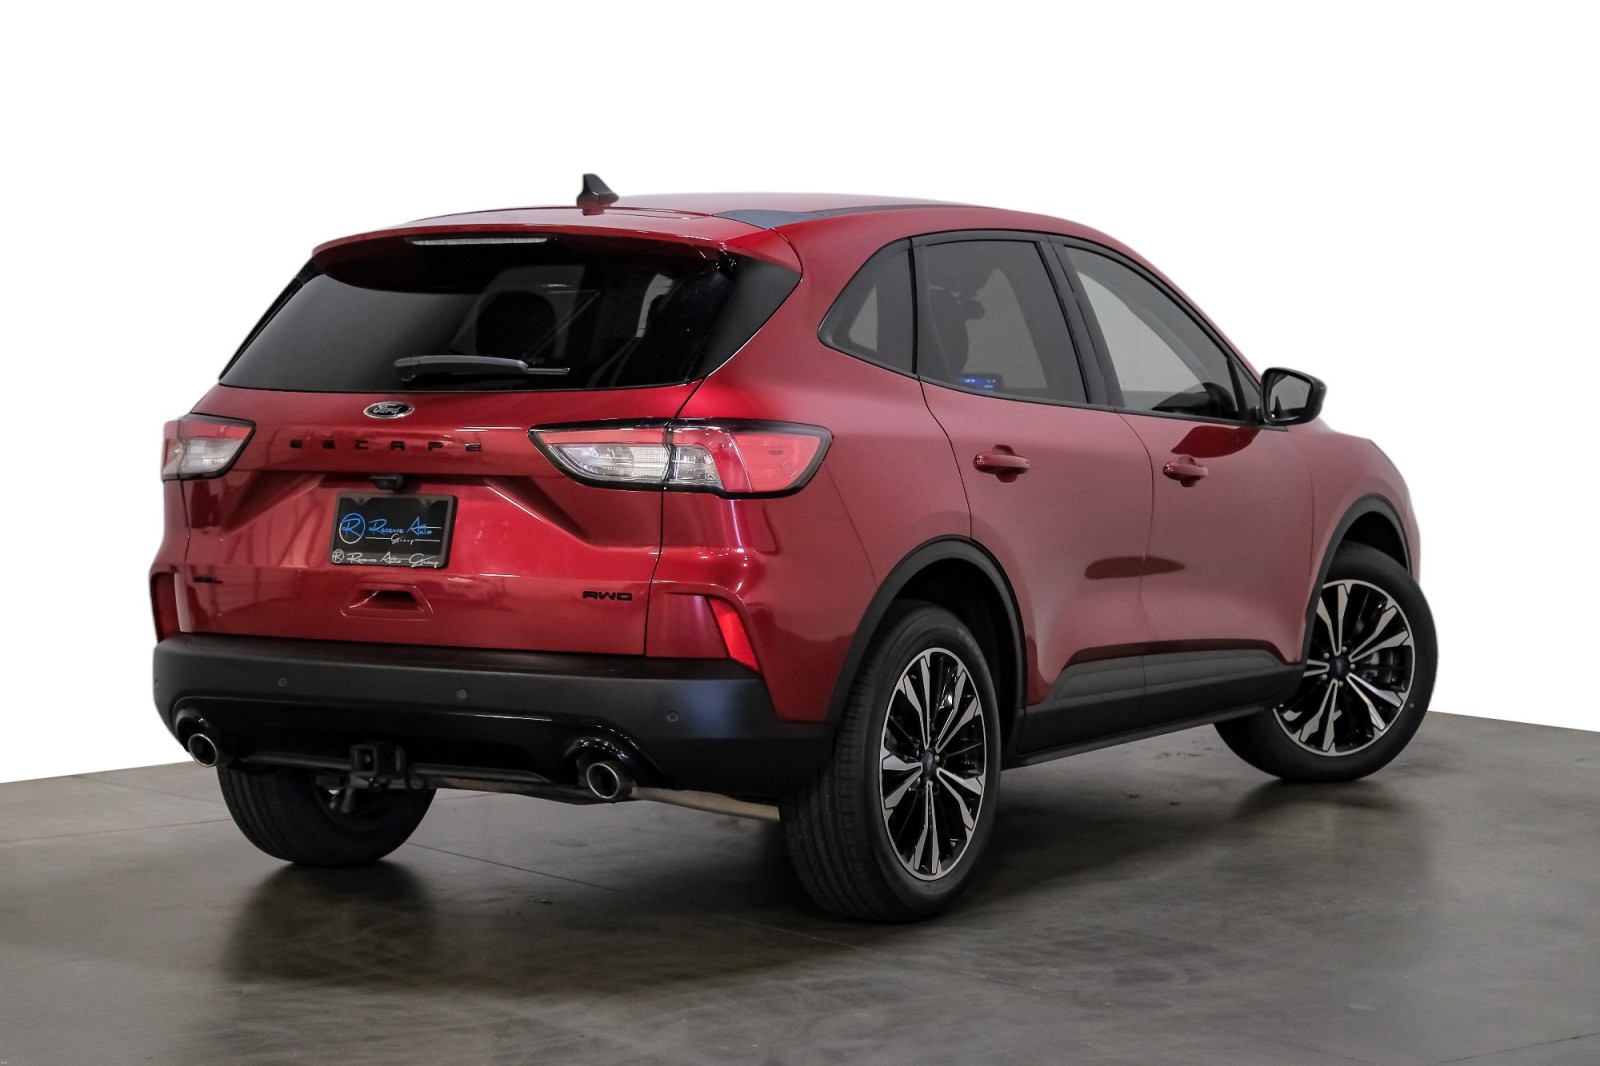 2022 Ford Escape SEL Stealth AWD B&OSound Co-Piot360 TowPkg 19Alloy 7